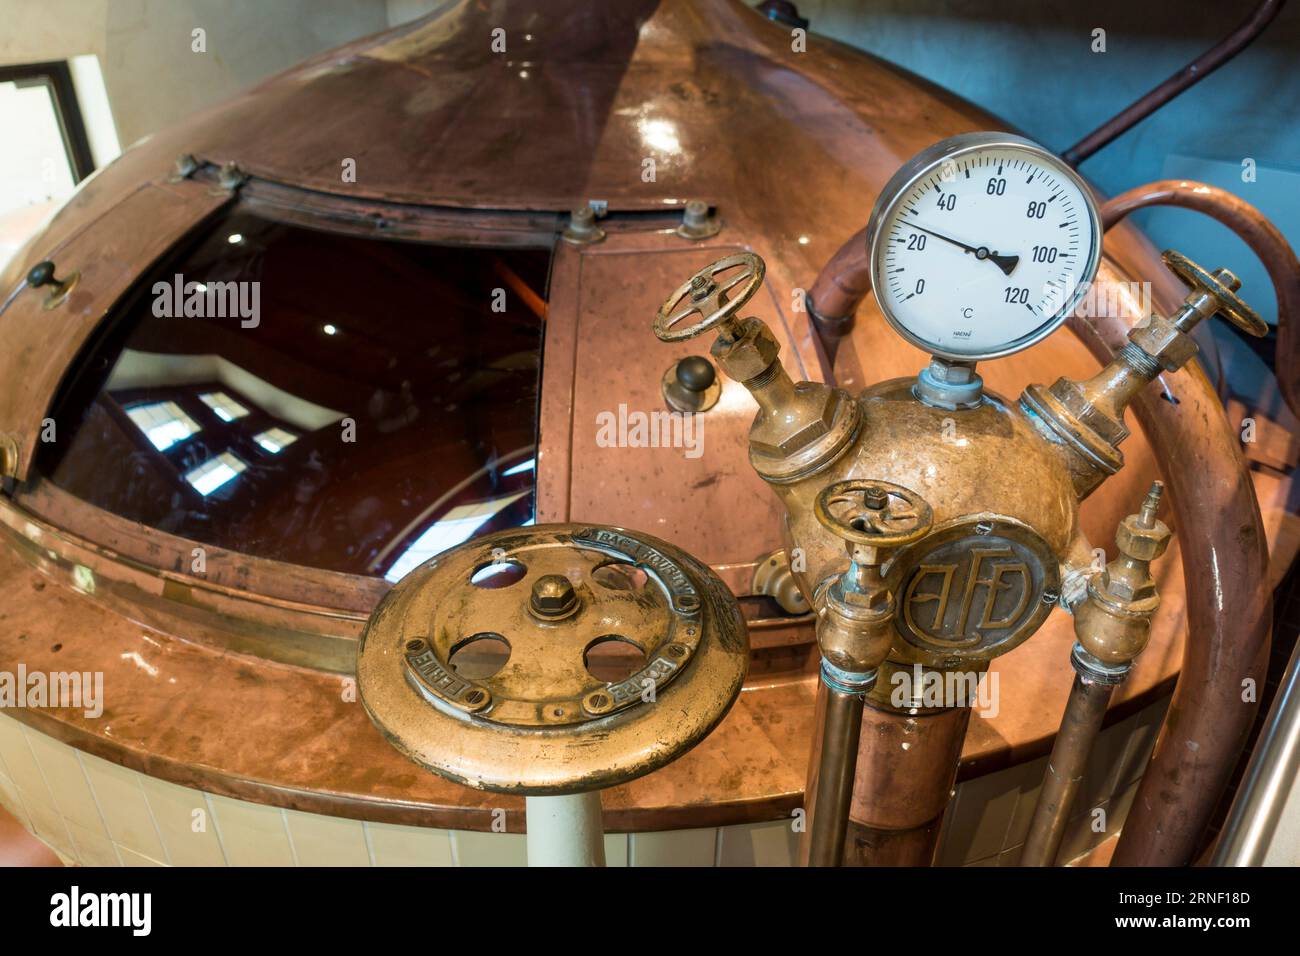 Gauge and valves on copper kettle of Trappist beer brewery in the Orval Abbey / Abbaye Notre-Dame d'Orval, Villers-devant-Orval, Wallonia, Belgium Stock Photo